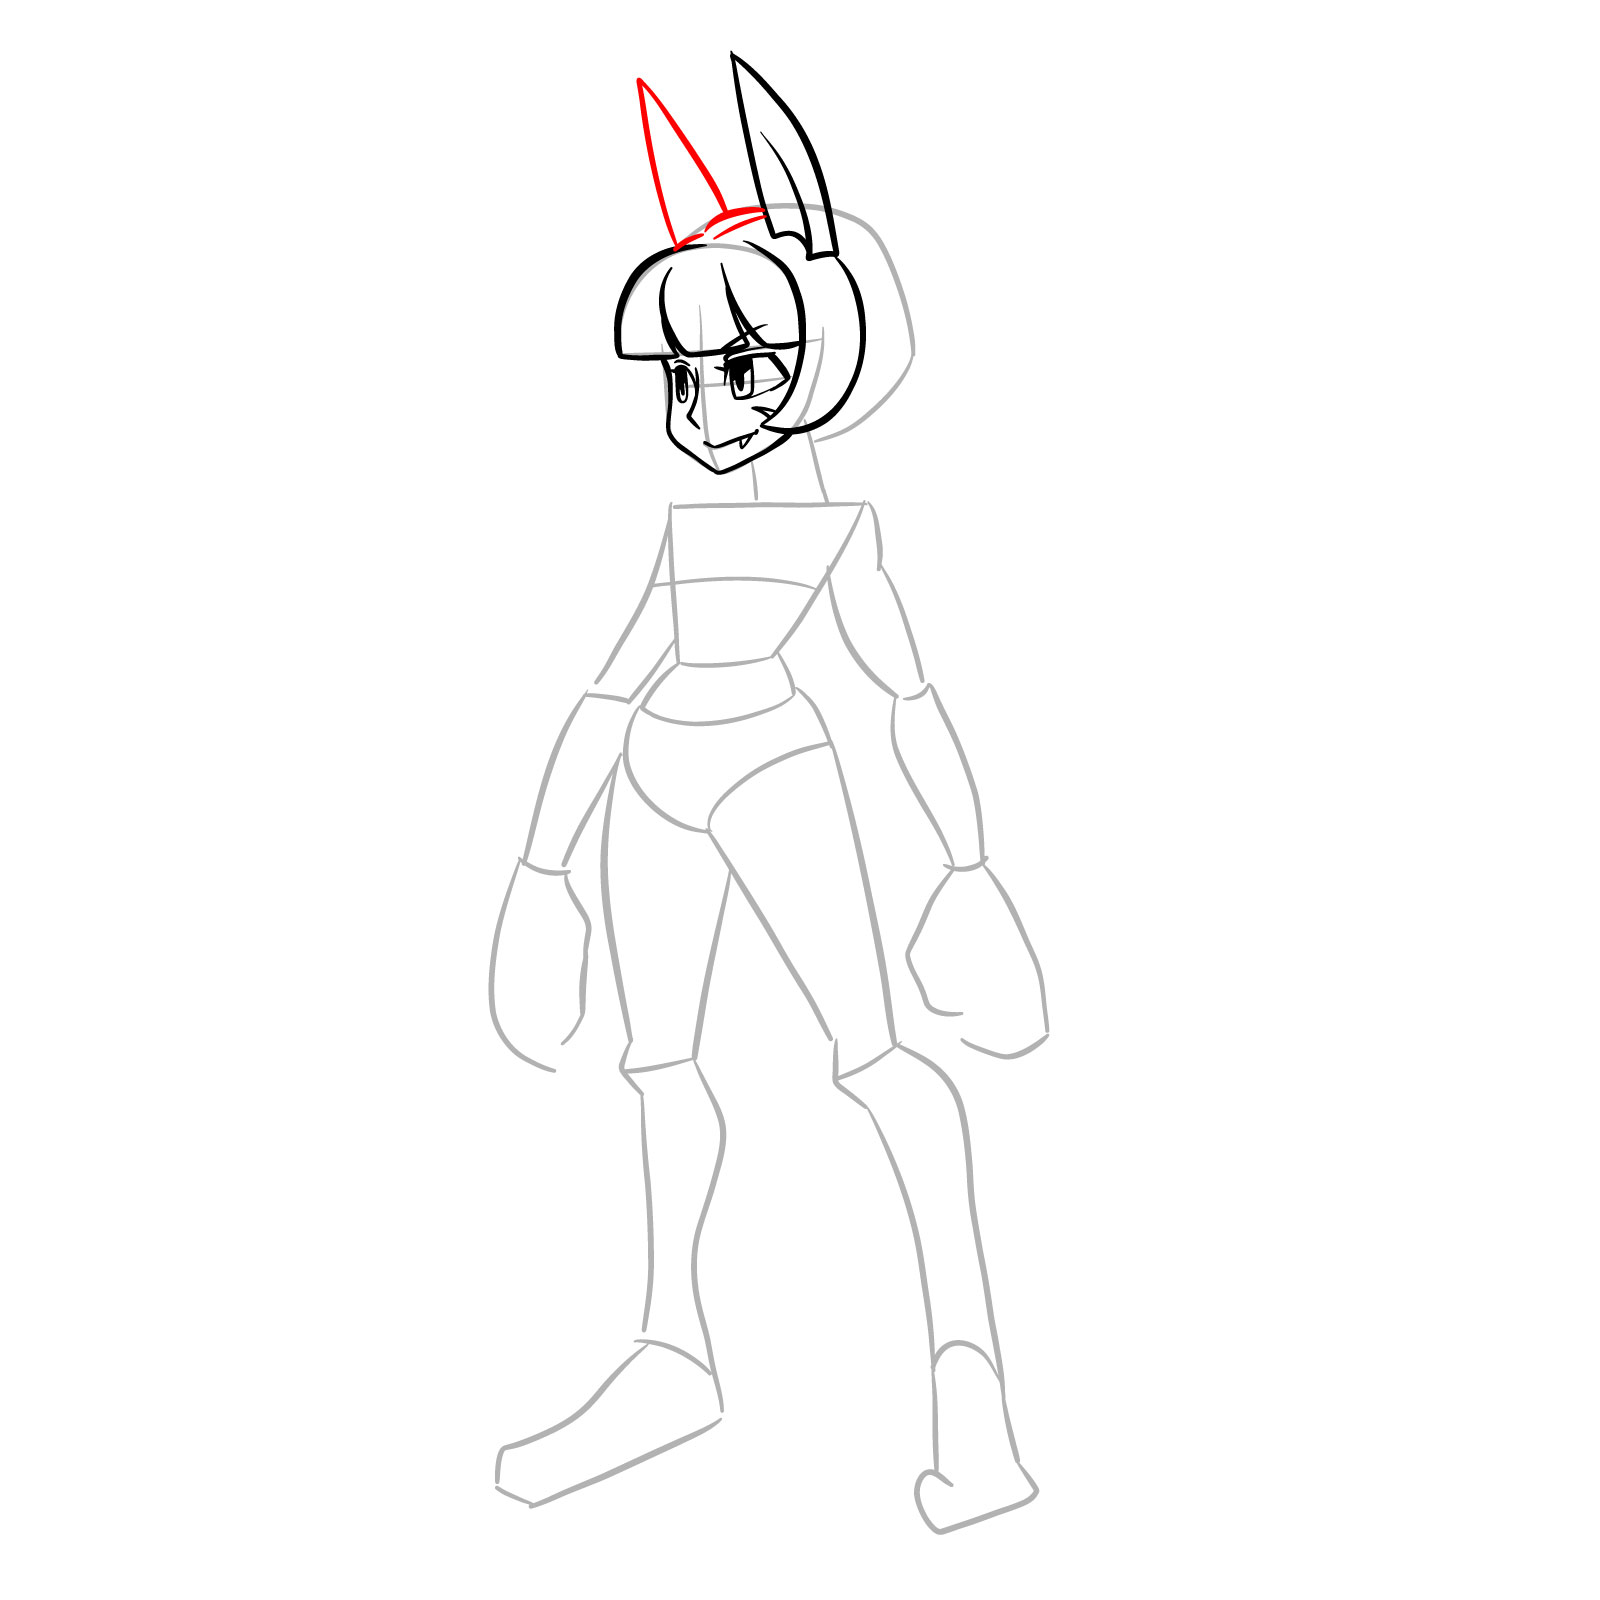 How to draw Ms. Fortune from Skullgirls - step 11